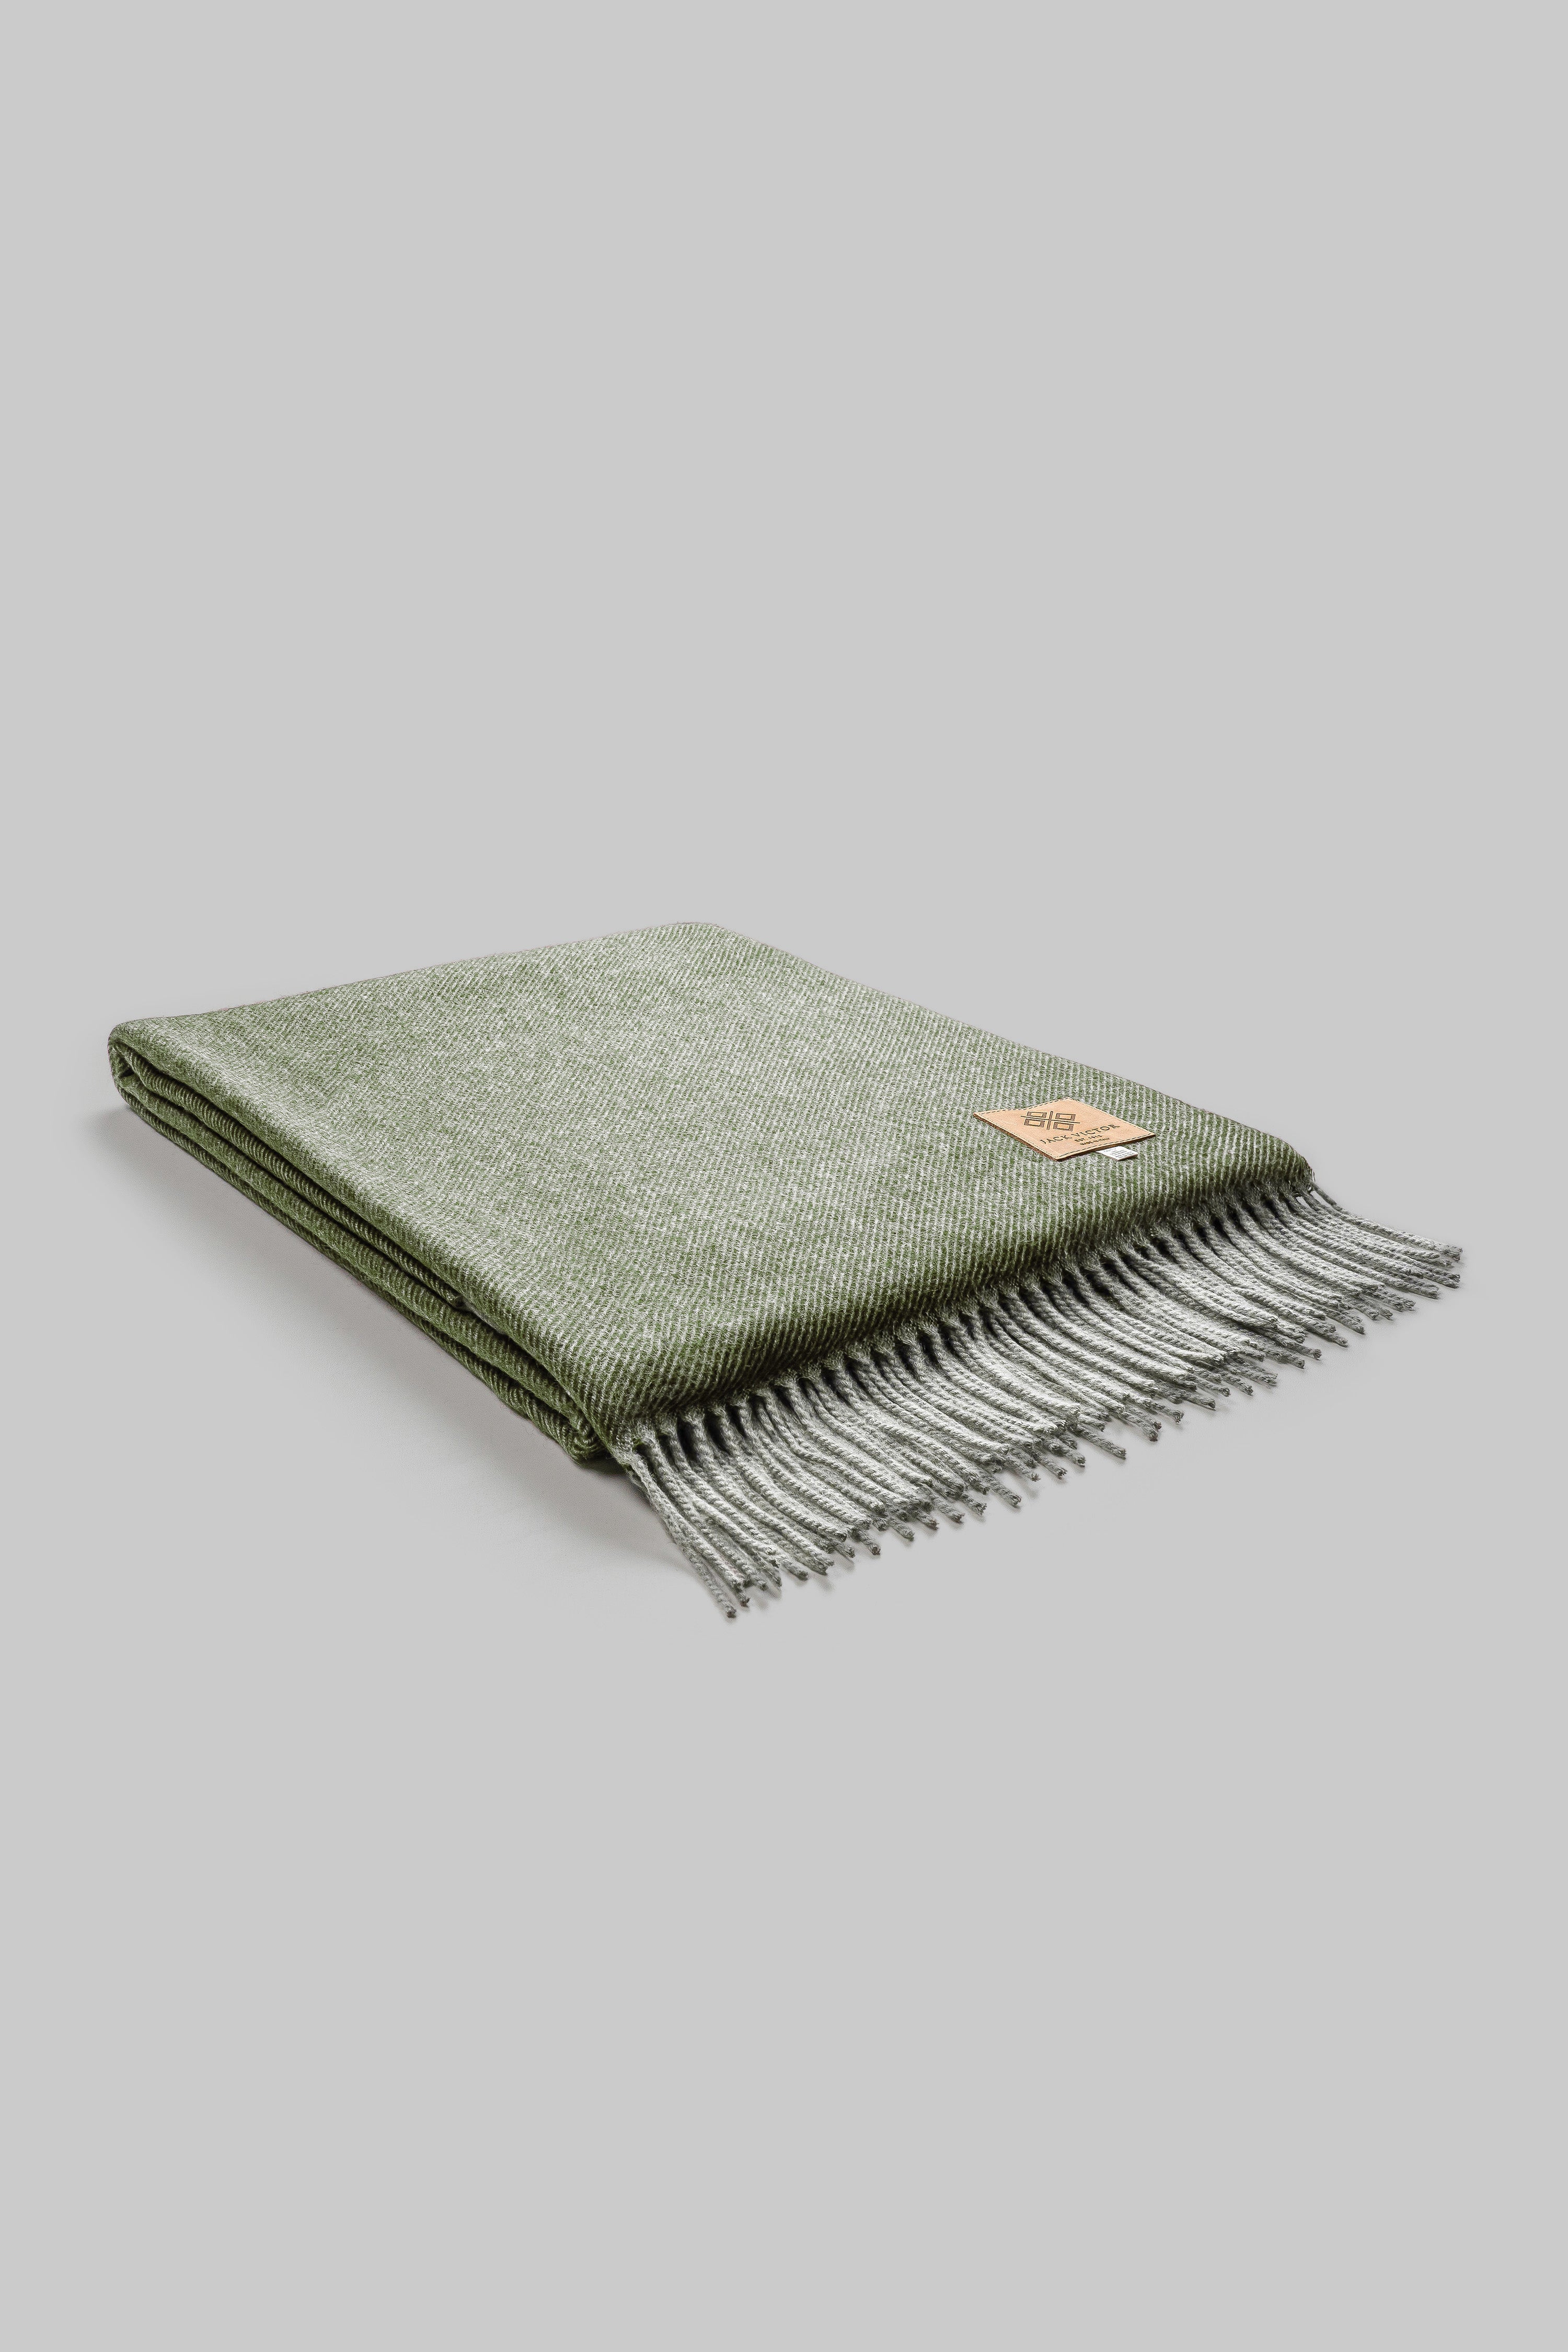 Alt view 2 Cashmere Twill Throw in Green